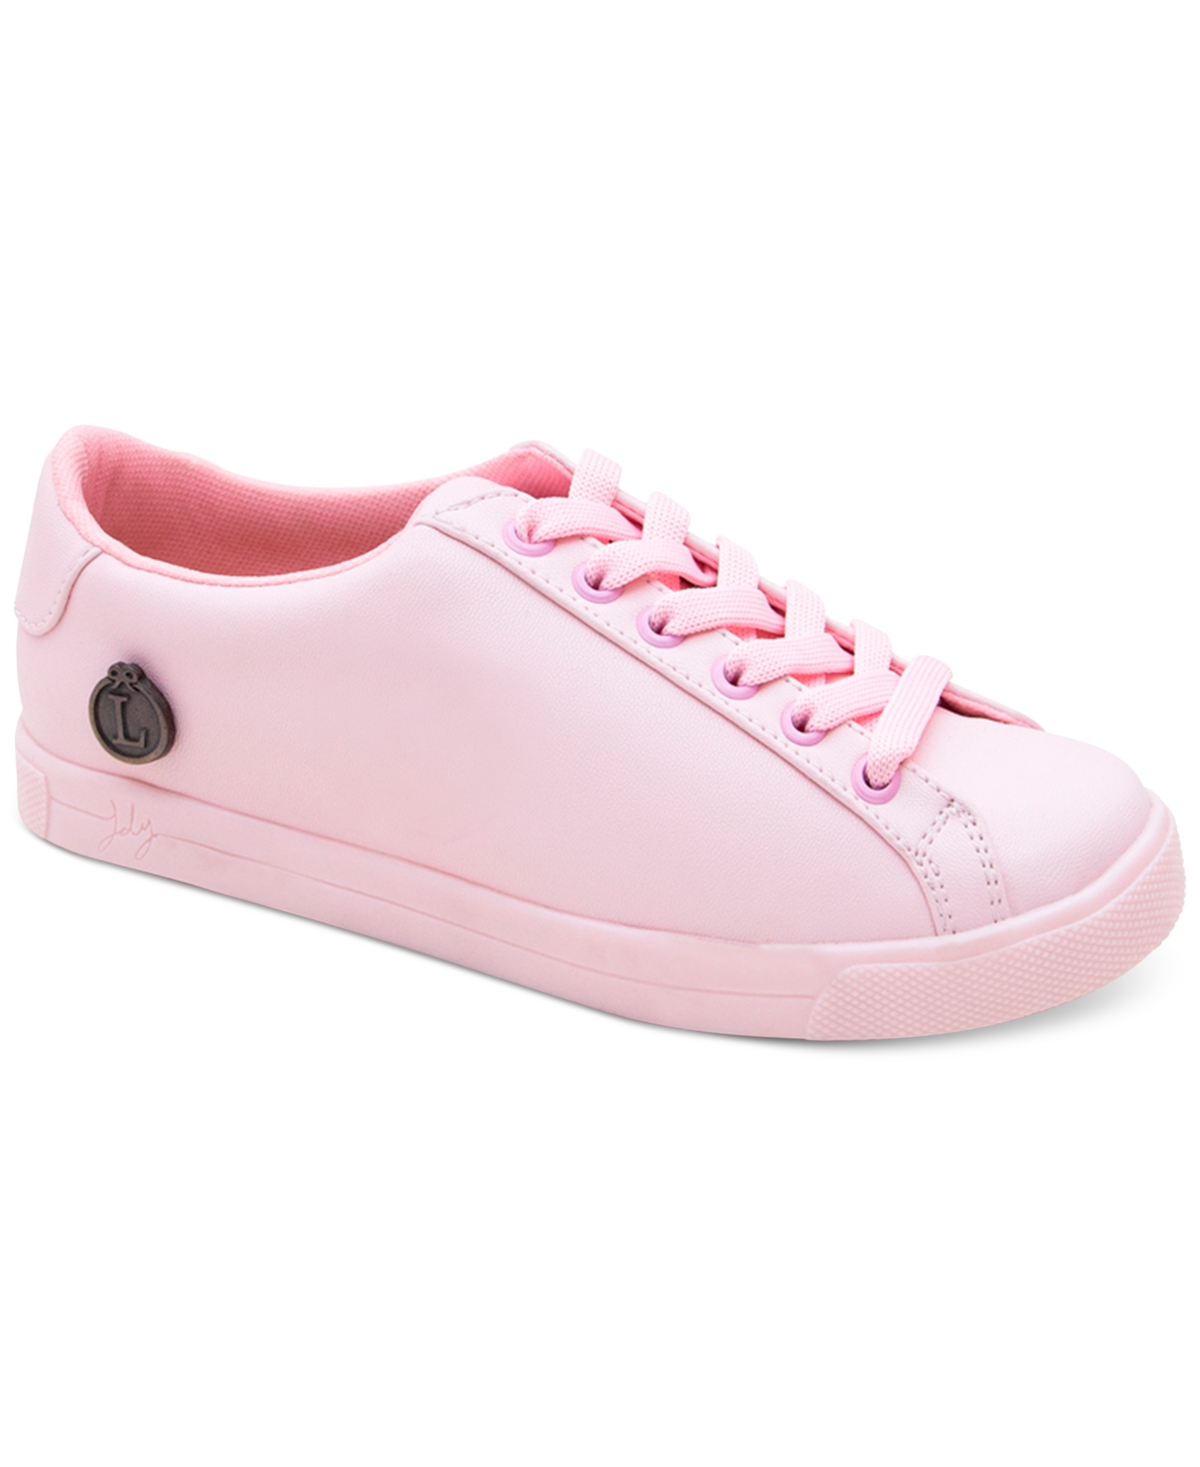 Loly in the sky Sara Sneakers Women's Shoes